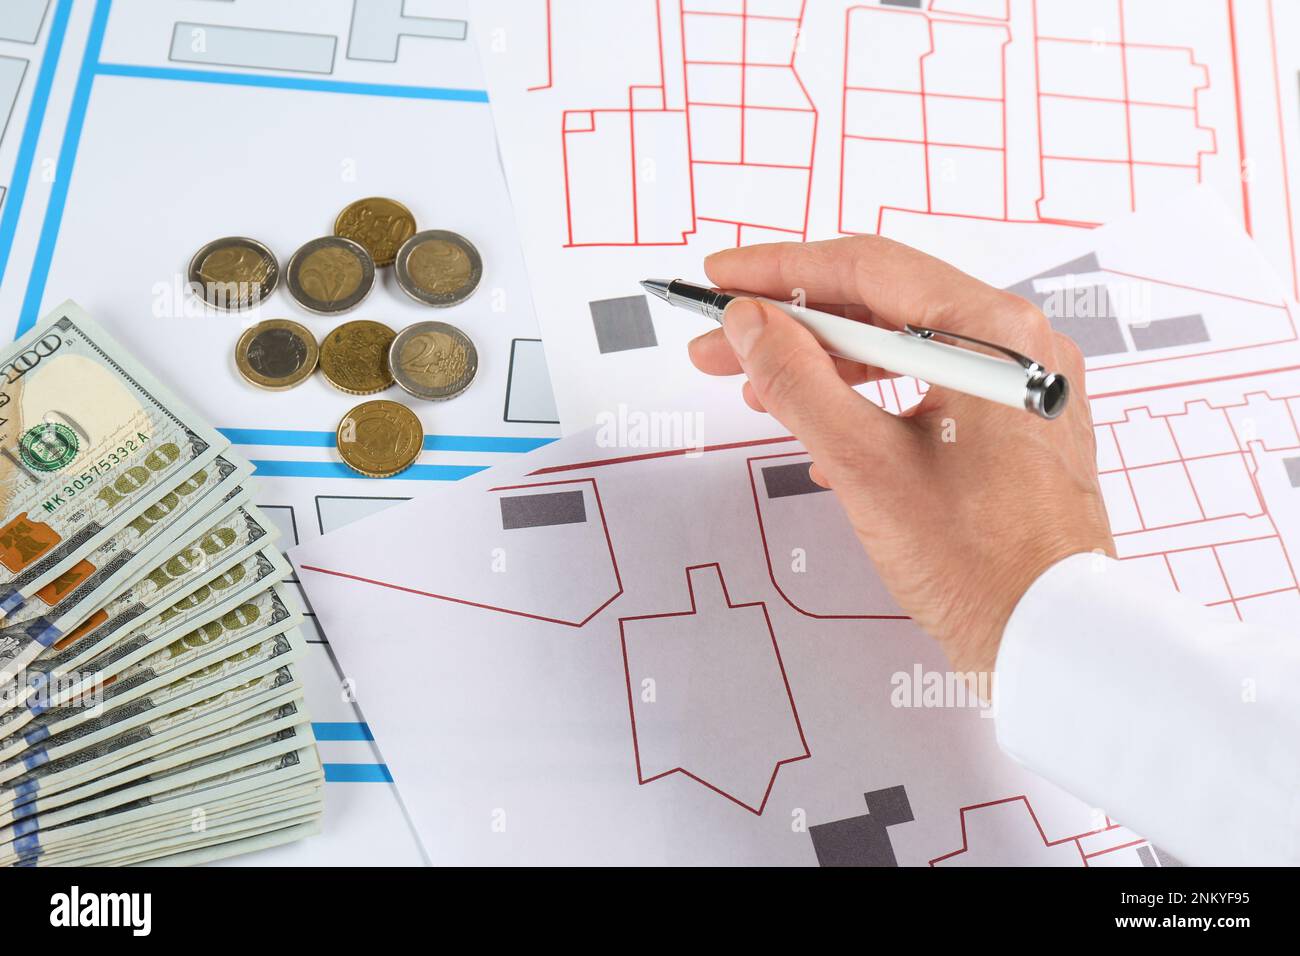 Cartographer with money drawing cadastral map, closeup Stock Photo